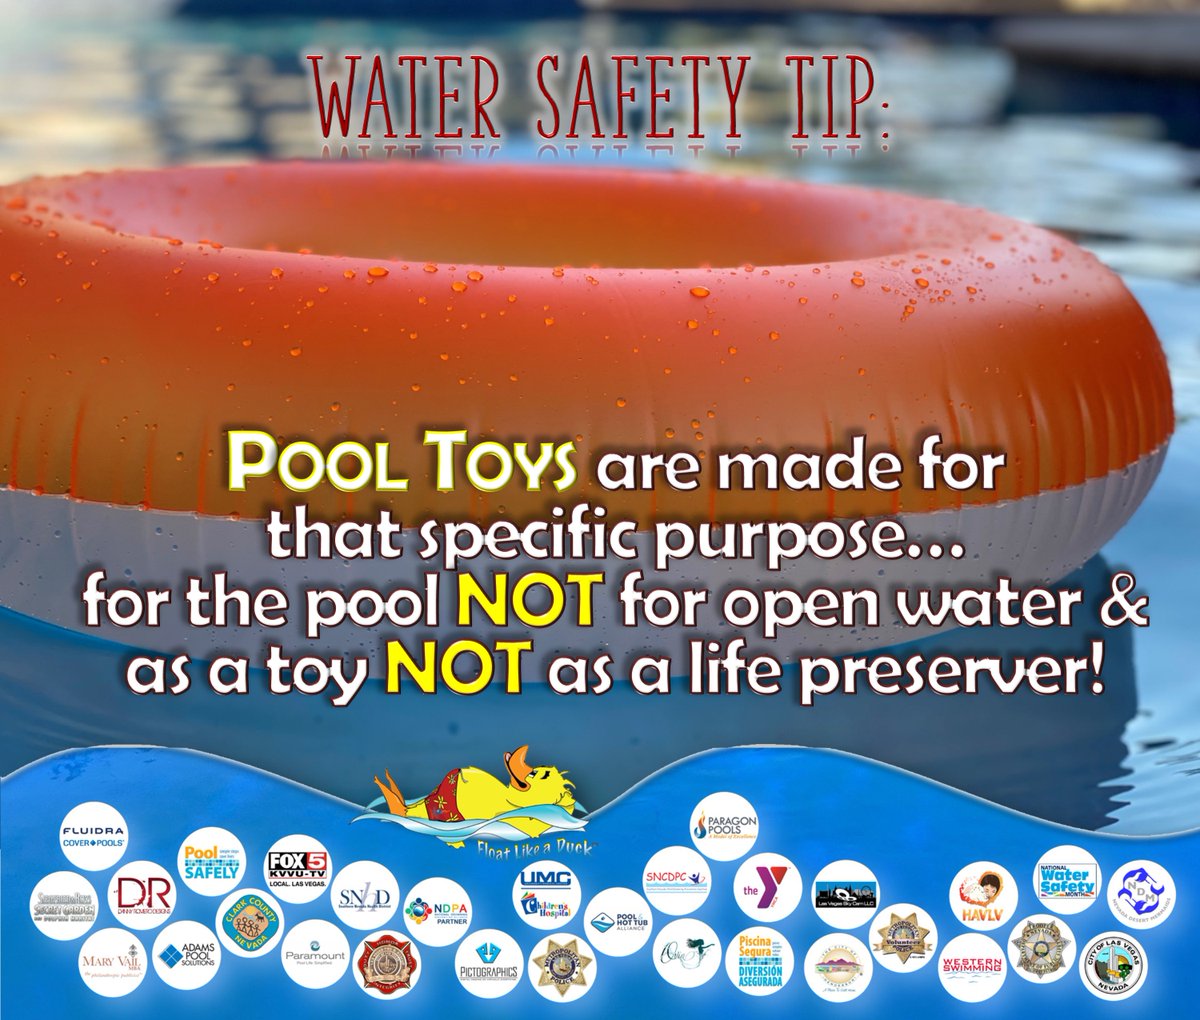 POOL TOYS are made for that specific purpose… 
for the pool NOT for open water & as a toy NOT as a life preserver! #pooltoys #poolfloat #watersafetytip #watersafetymonth #floatlikeaduck #openwatersafety @ThePHTA @MayisNWSM  @drownalliance @SNCDPC @poolsafely @UMCSN @LasVegasFD